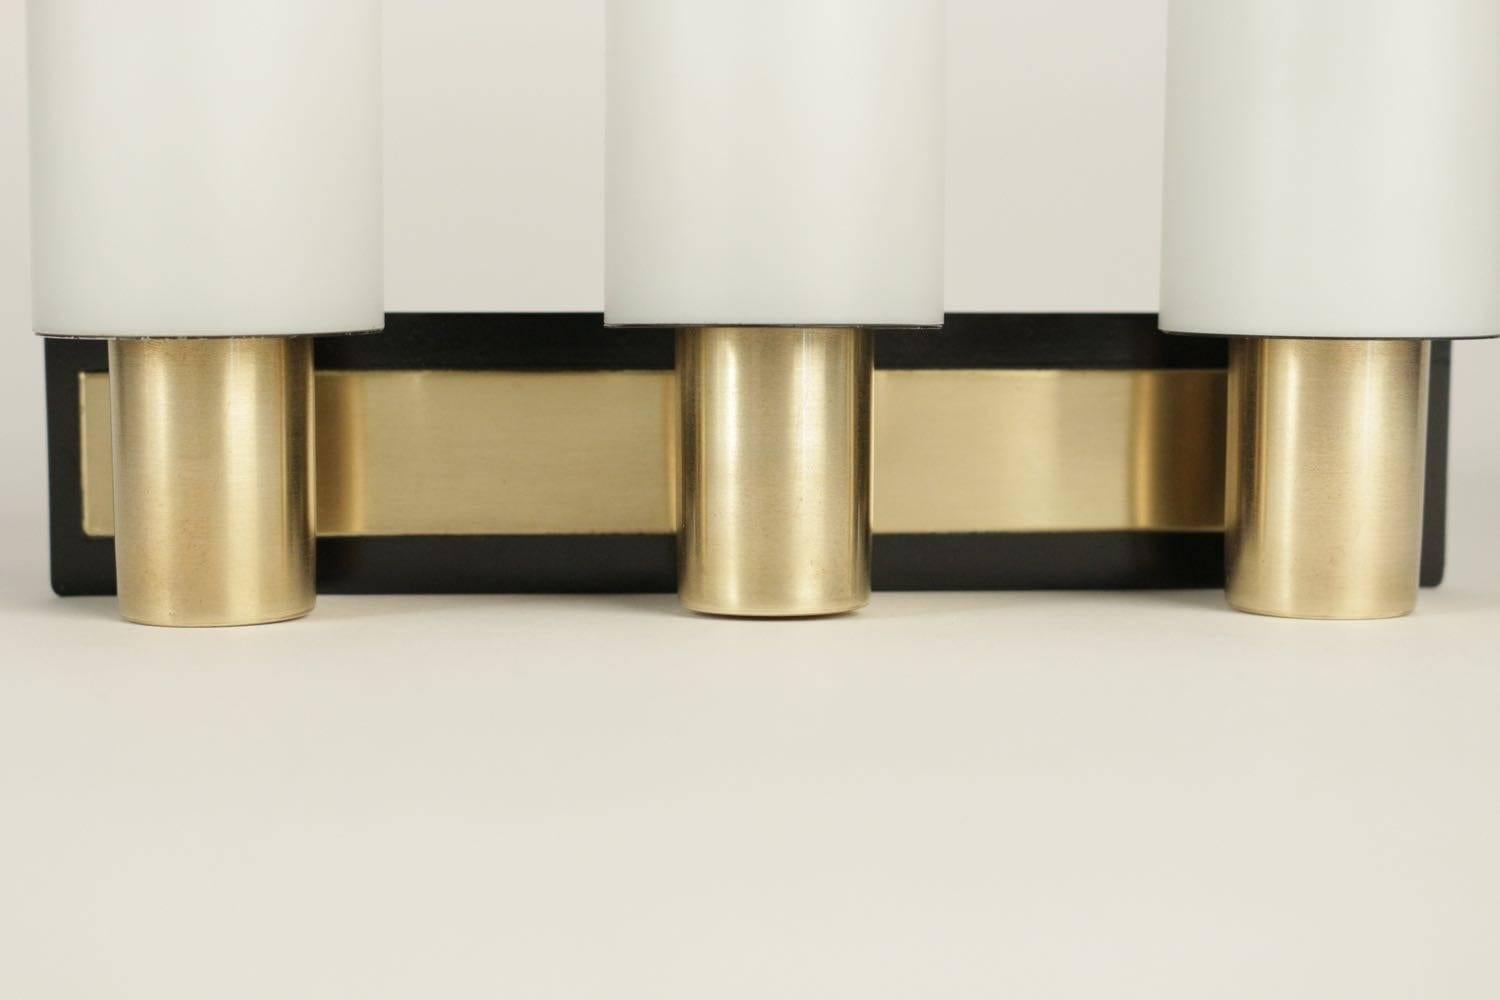 Pair of sconces by Maison Stillovo, 1950.

Each sconce are composed by horizontal brass back plate framed with black lacquer. The back plate supports three cylindrical opaline glass lampshades mounted on cylindrical brass section. Sobre and chic